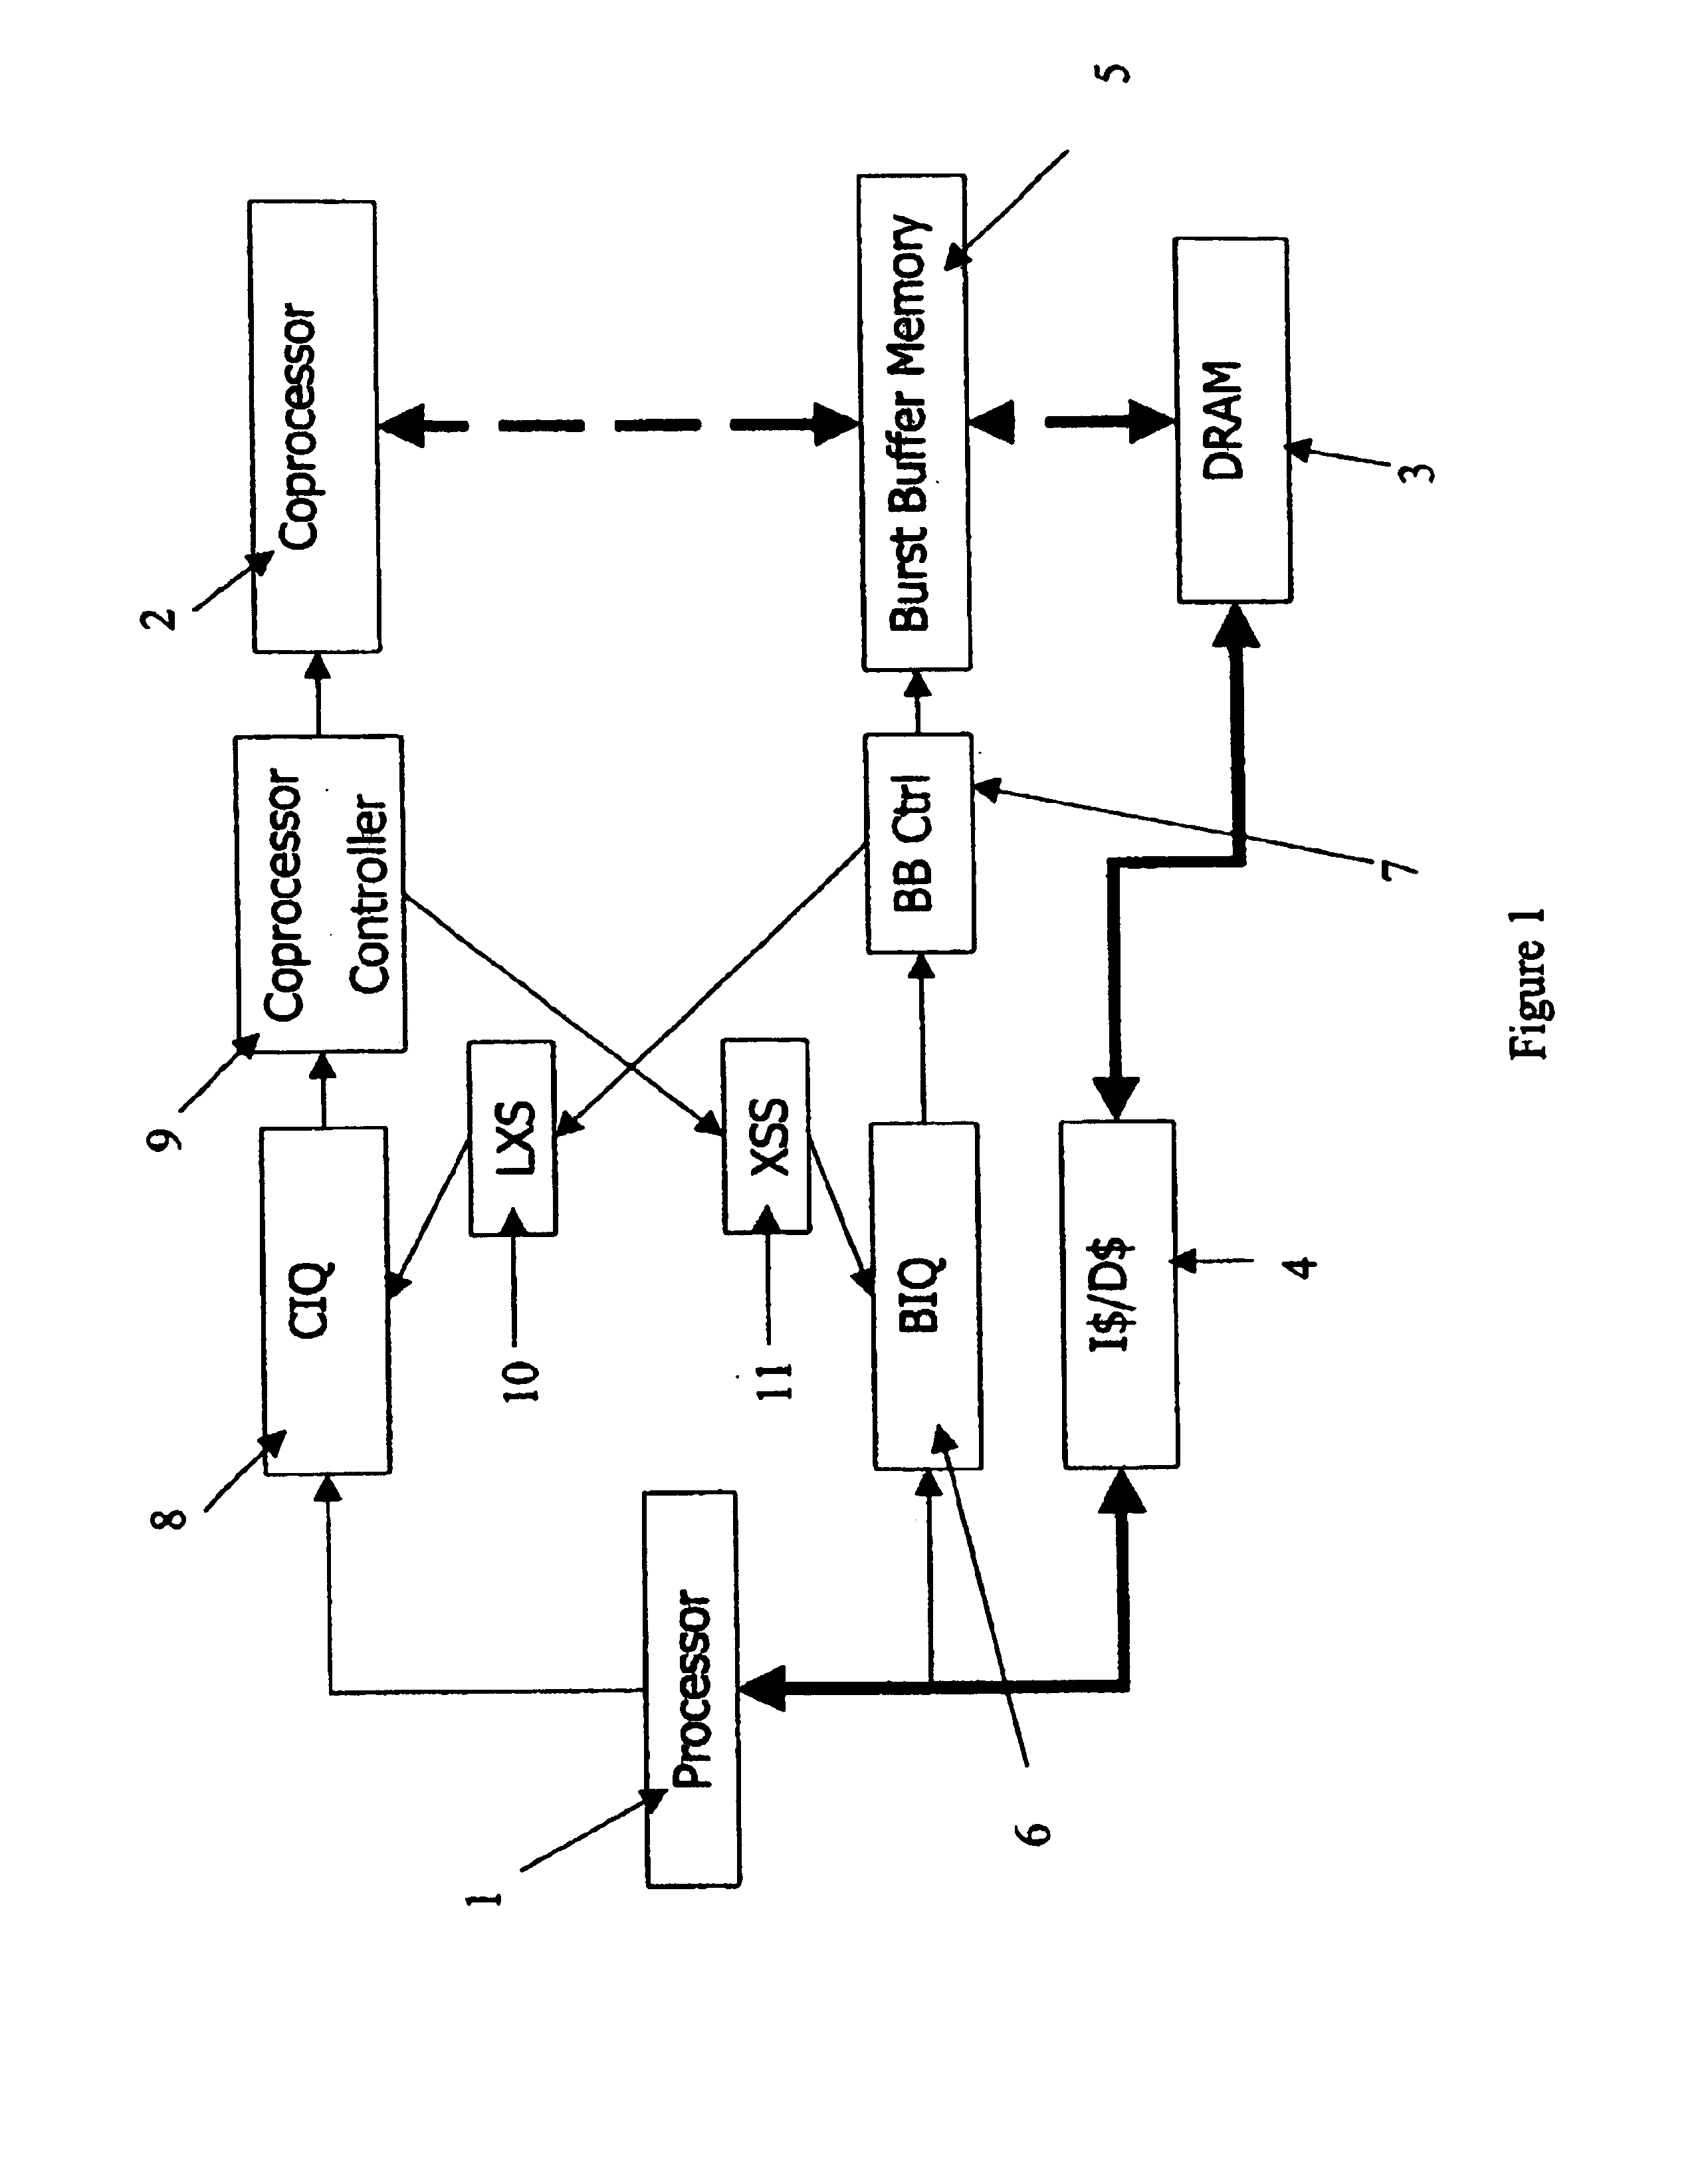 Memory and instructions in computer architecture containing processor and coprocessor